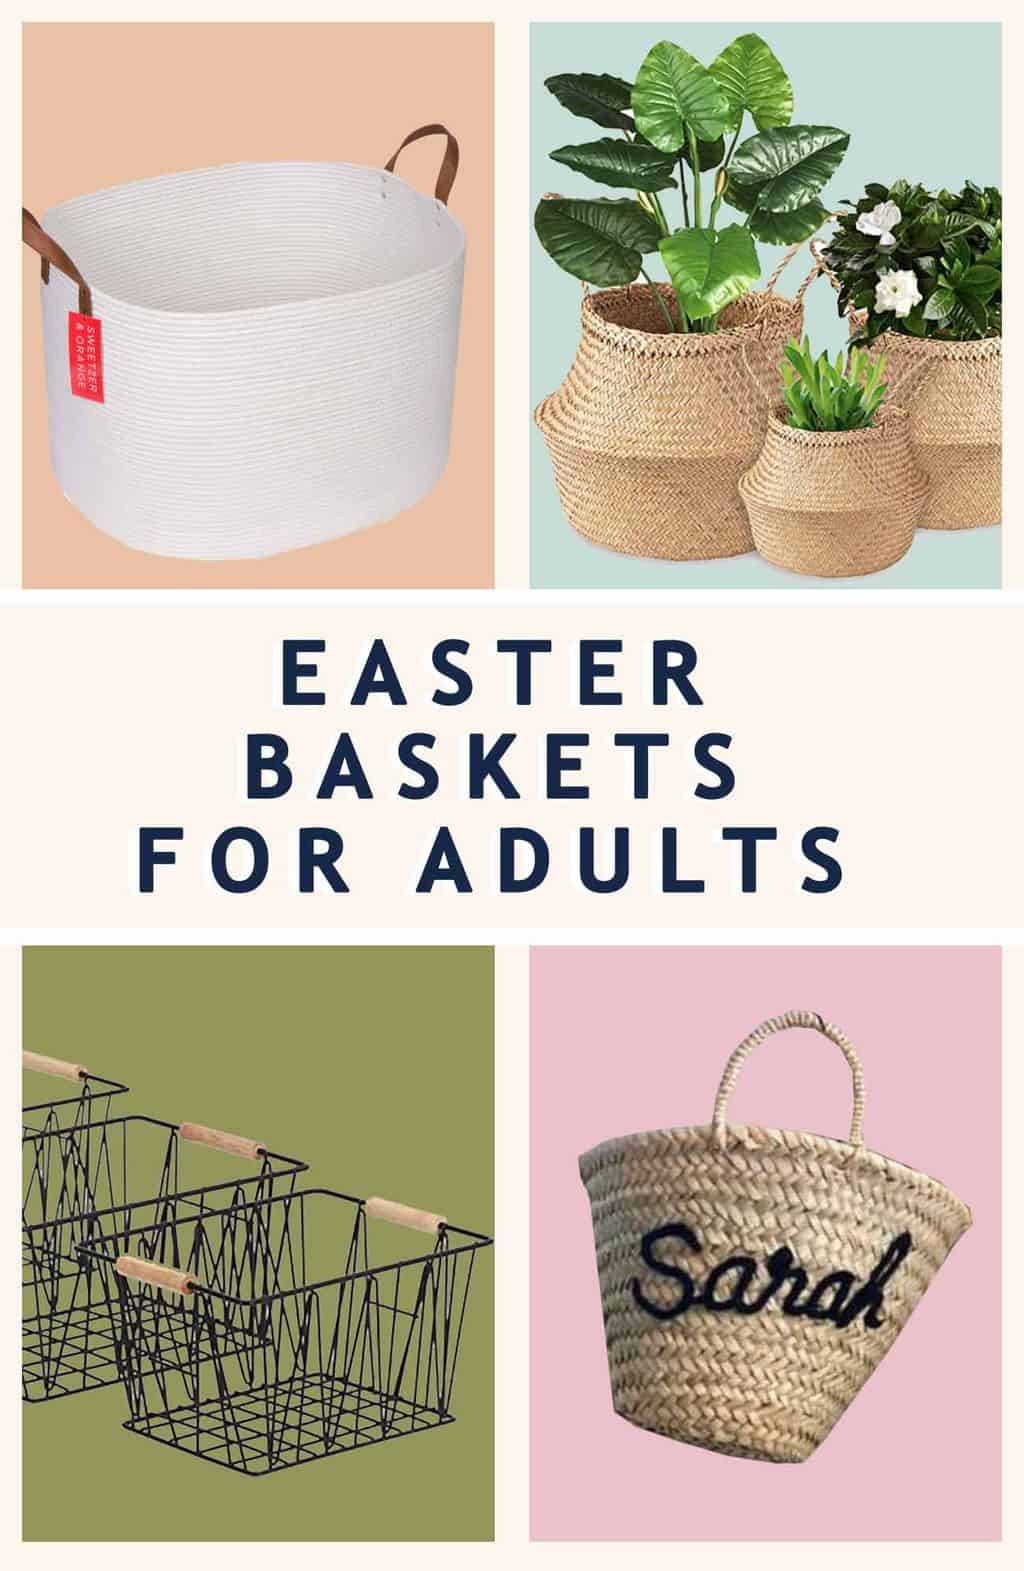 photo of our favorite Easter baskets for adults by top Houston lifestyle blogger Ashley Rose of Sugar & Cloth